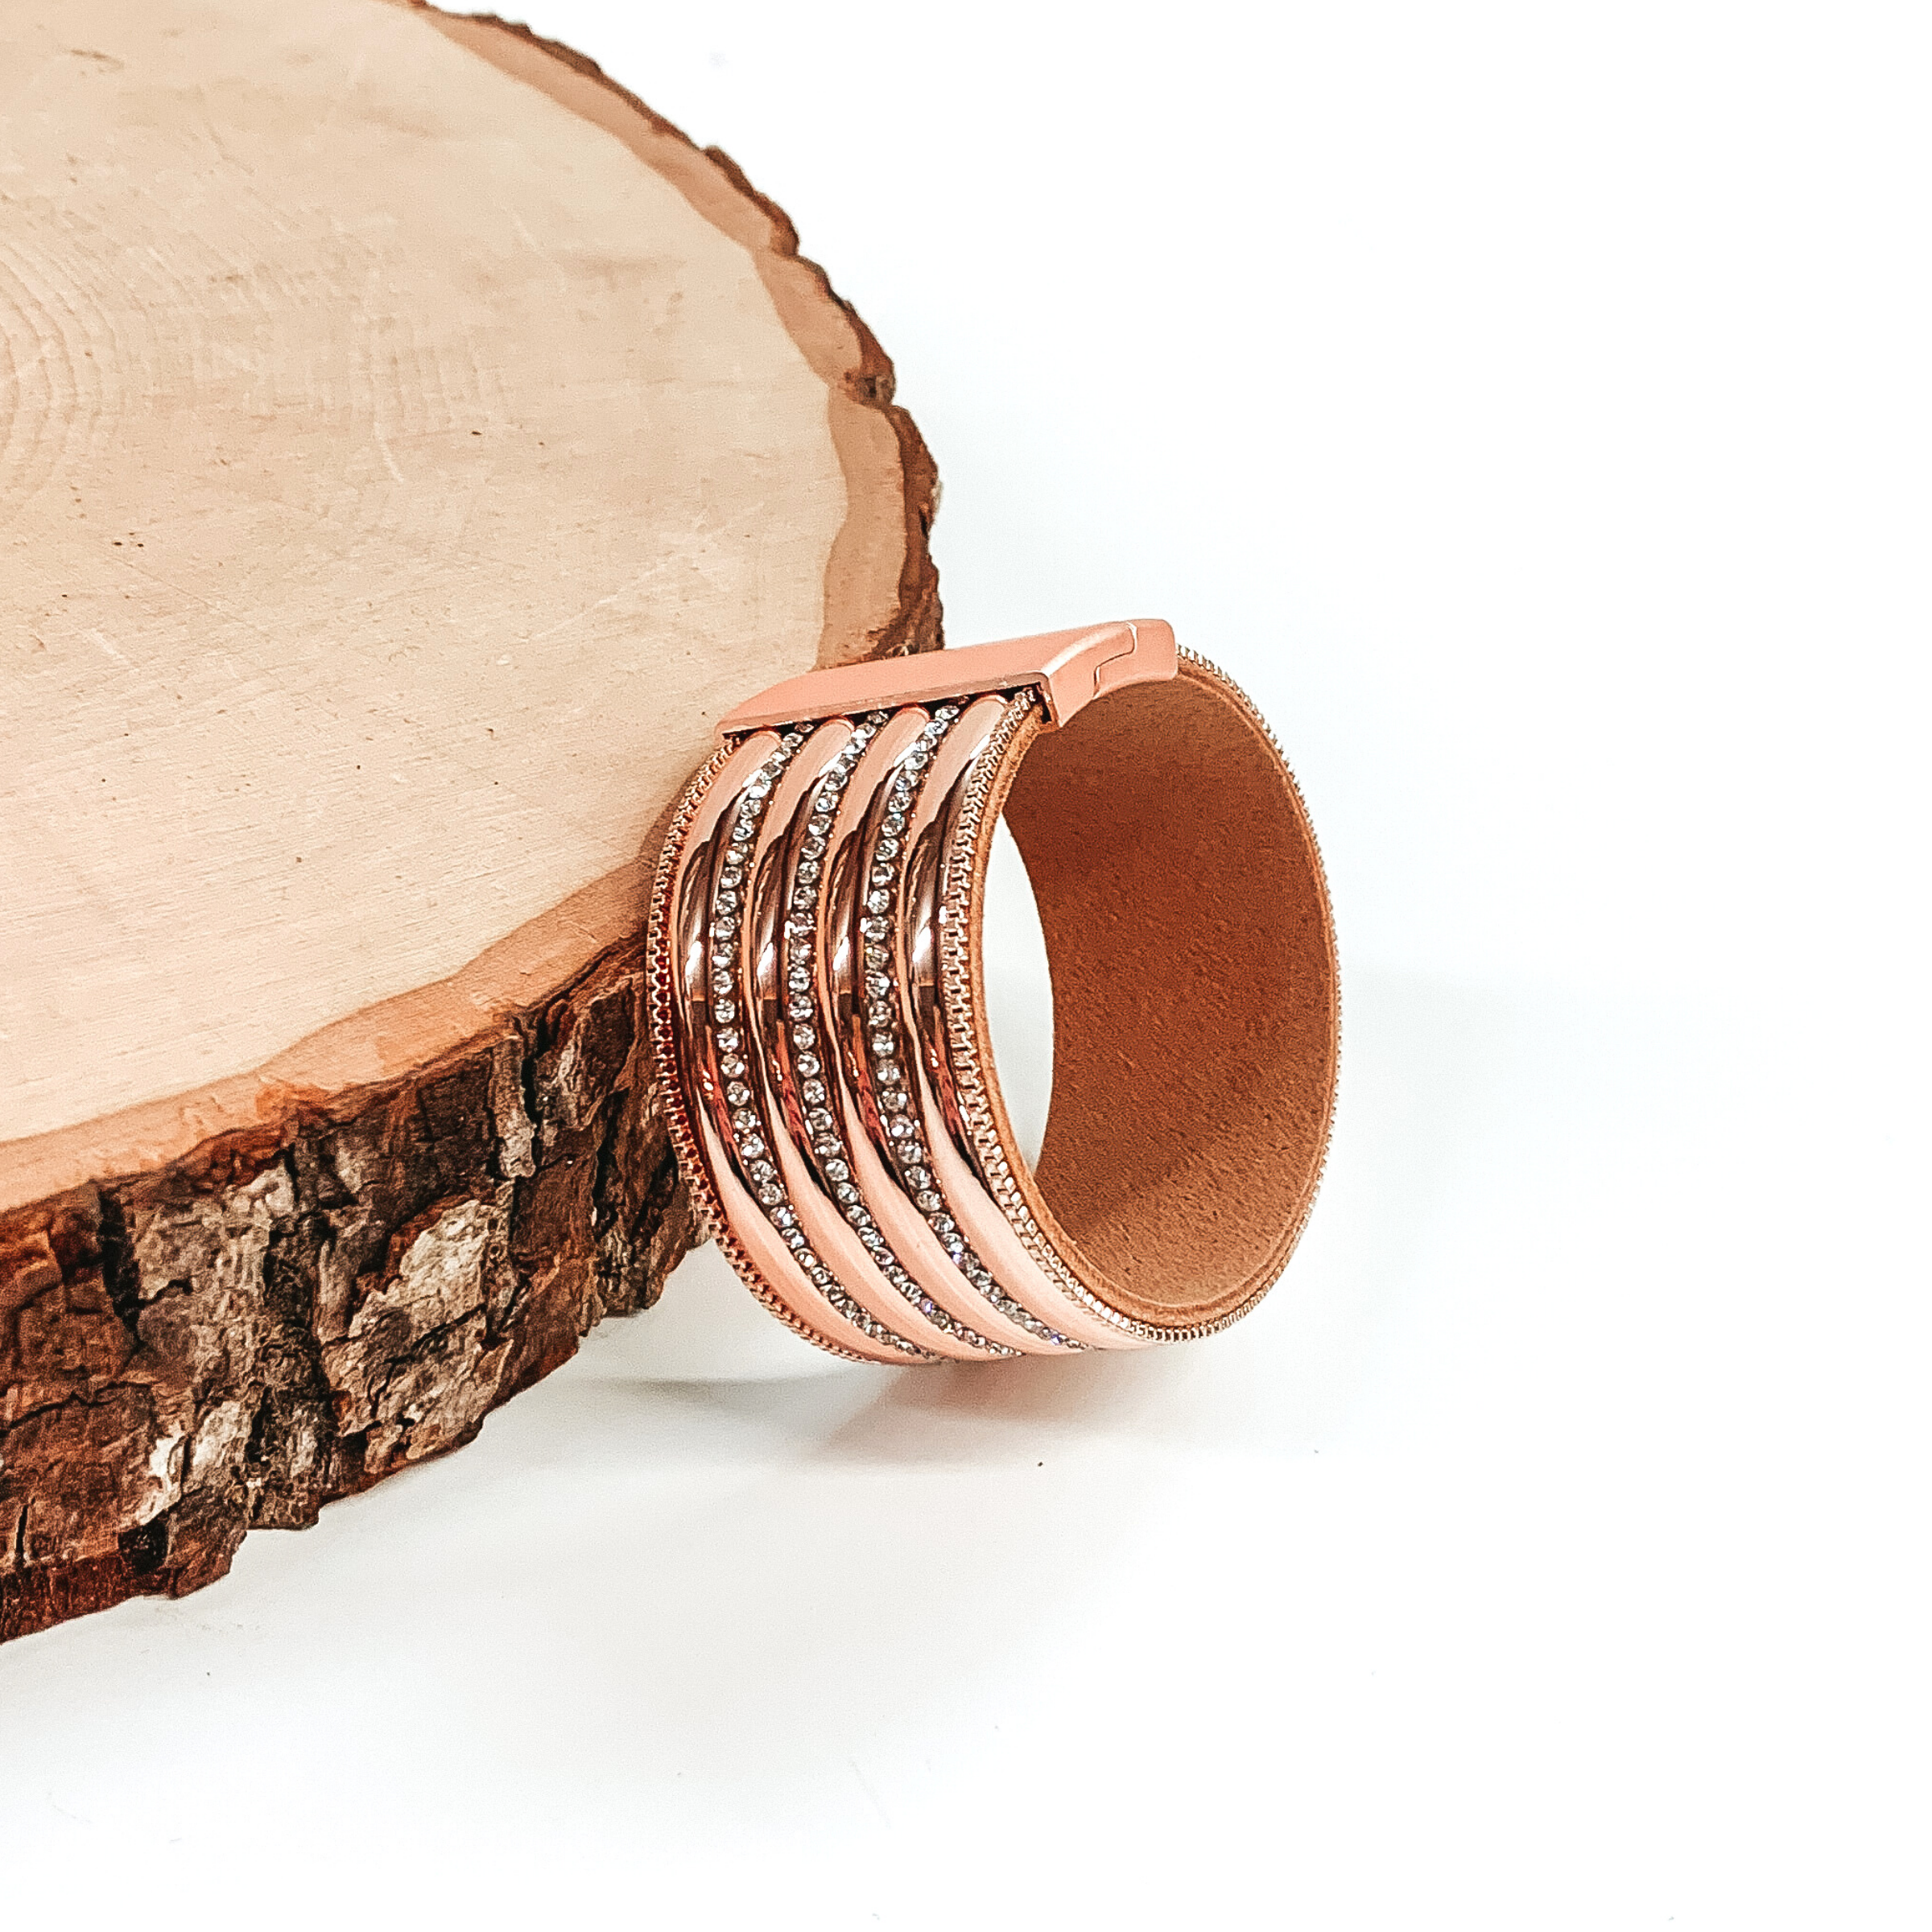 Wide band with rose gold colored rows separated by clear crystals. It has a rose gold clasp. This bracelet is pictured laying against a piece of wood on a white background.